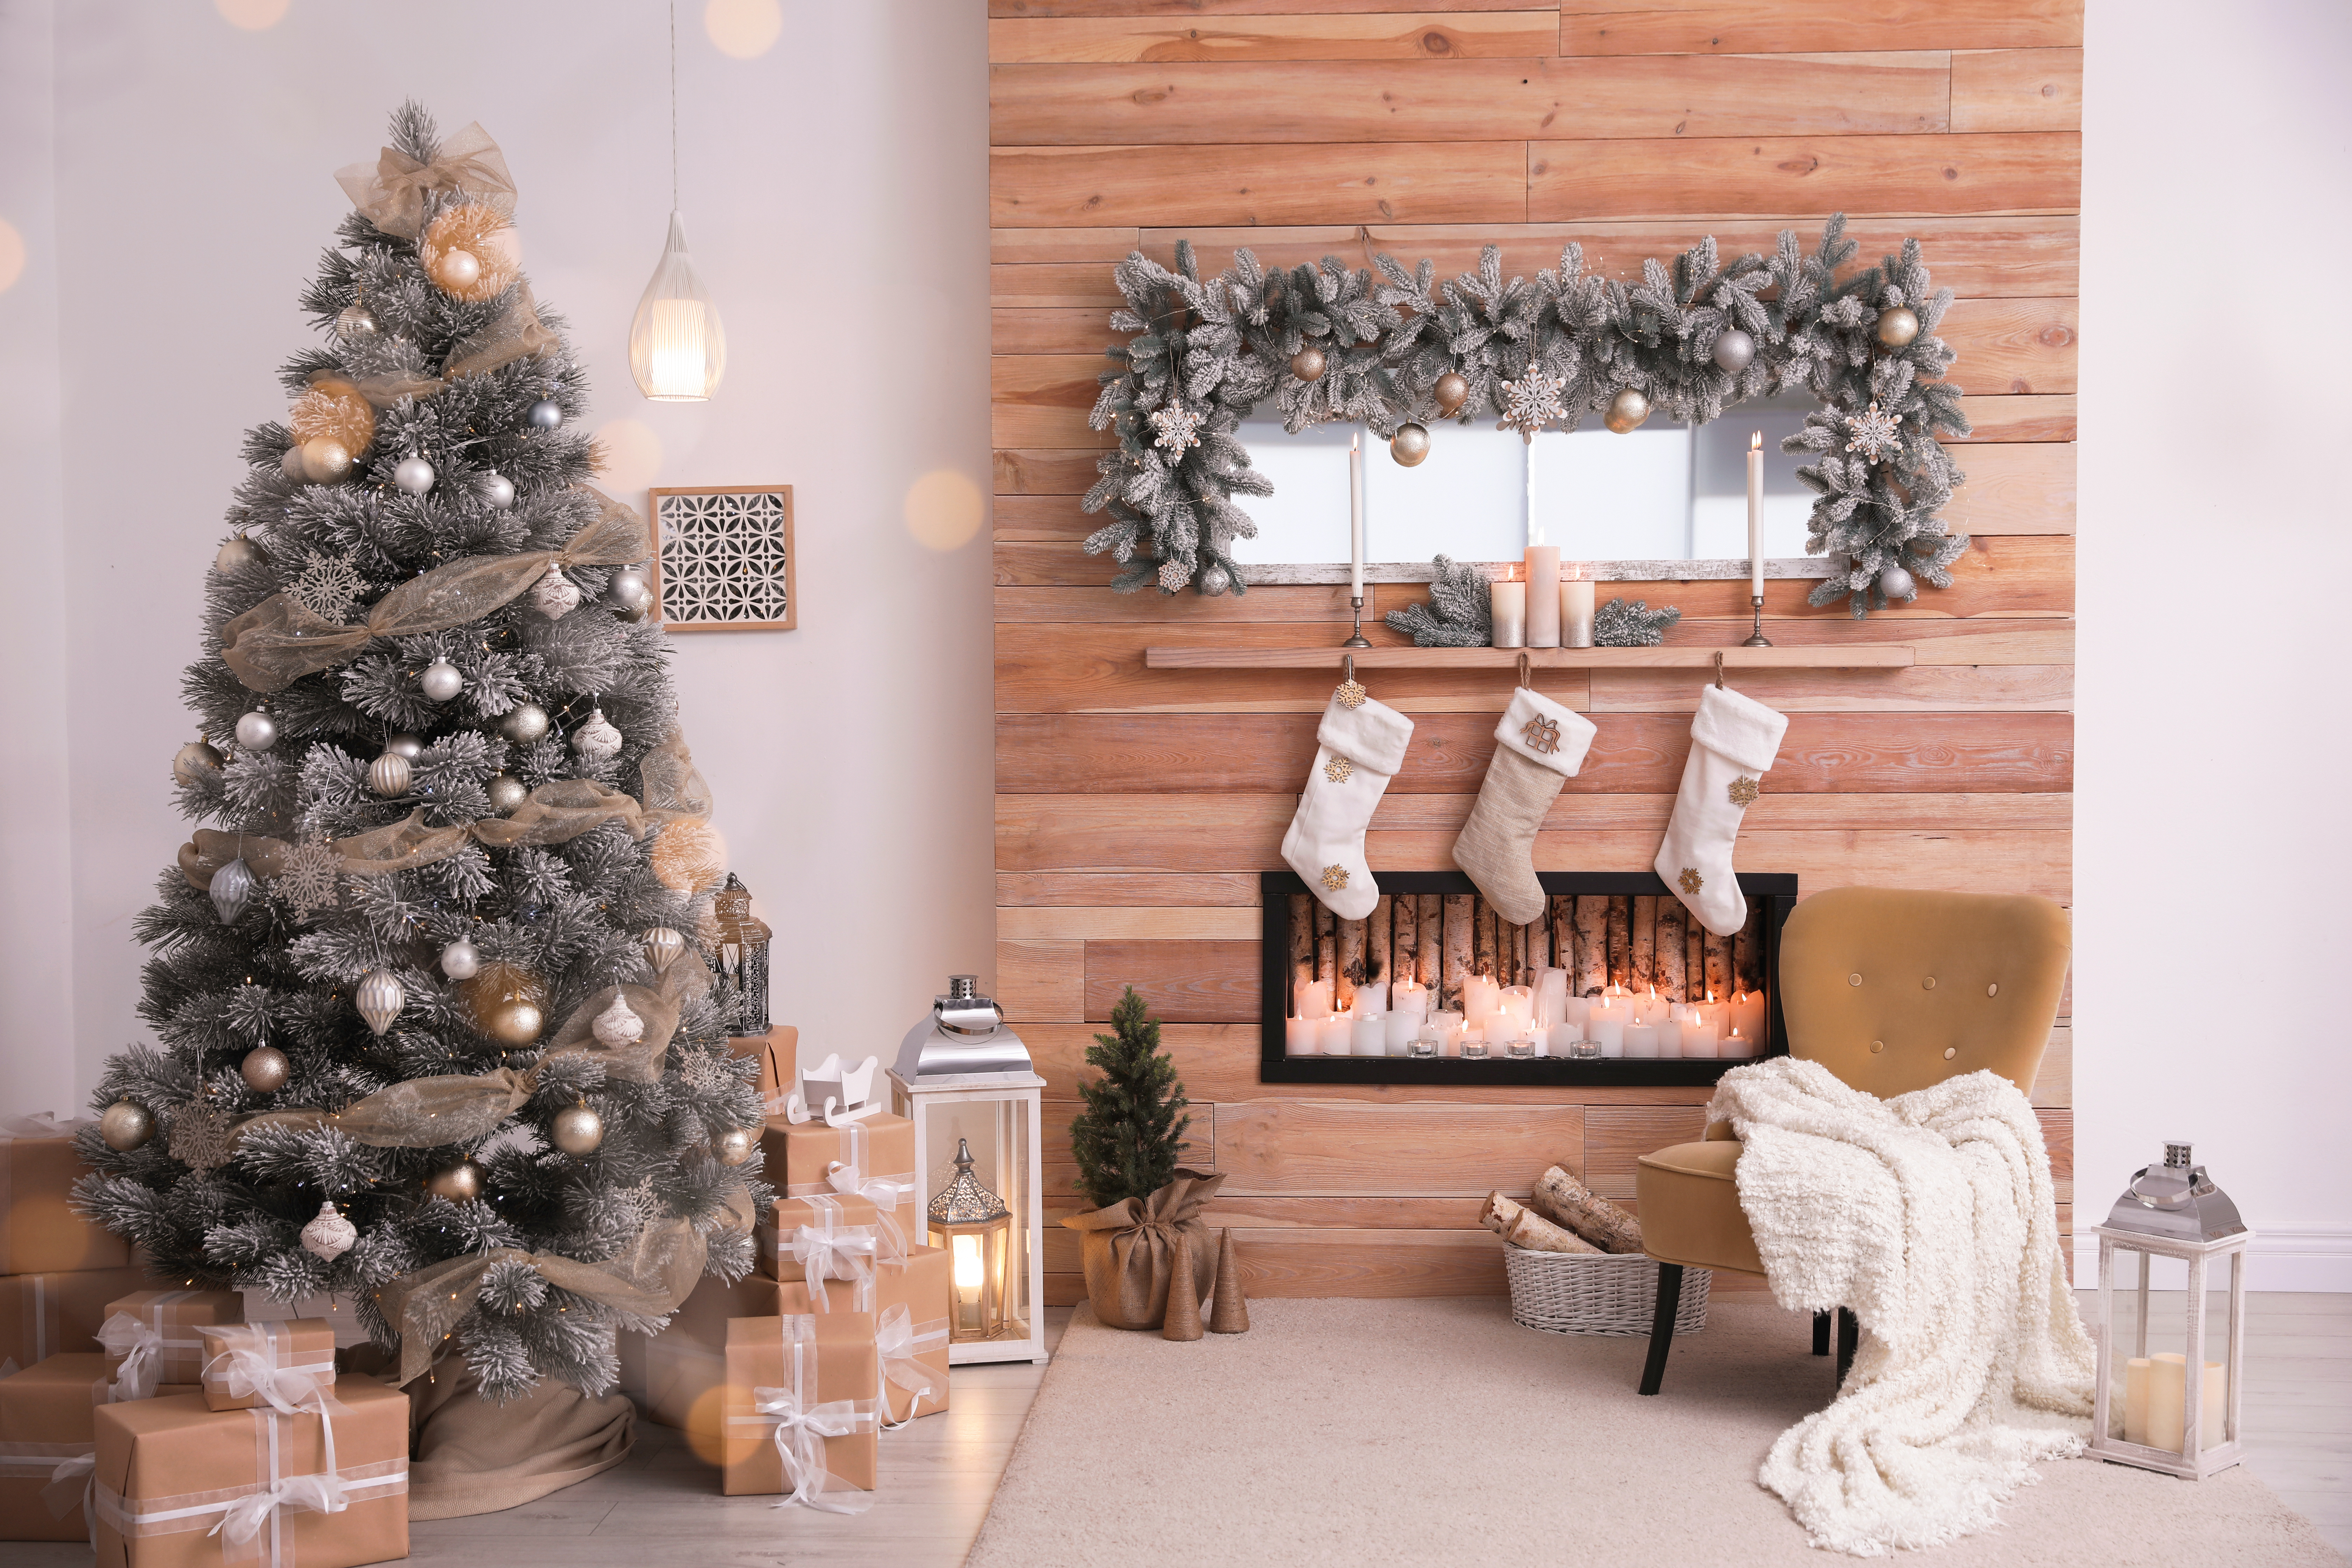 Staging Your Home to Sell: Should You Decorate for the Holidays if You are Selling?